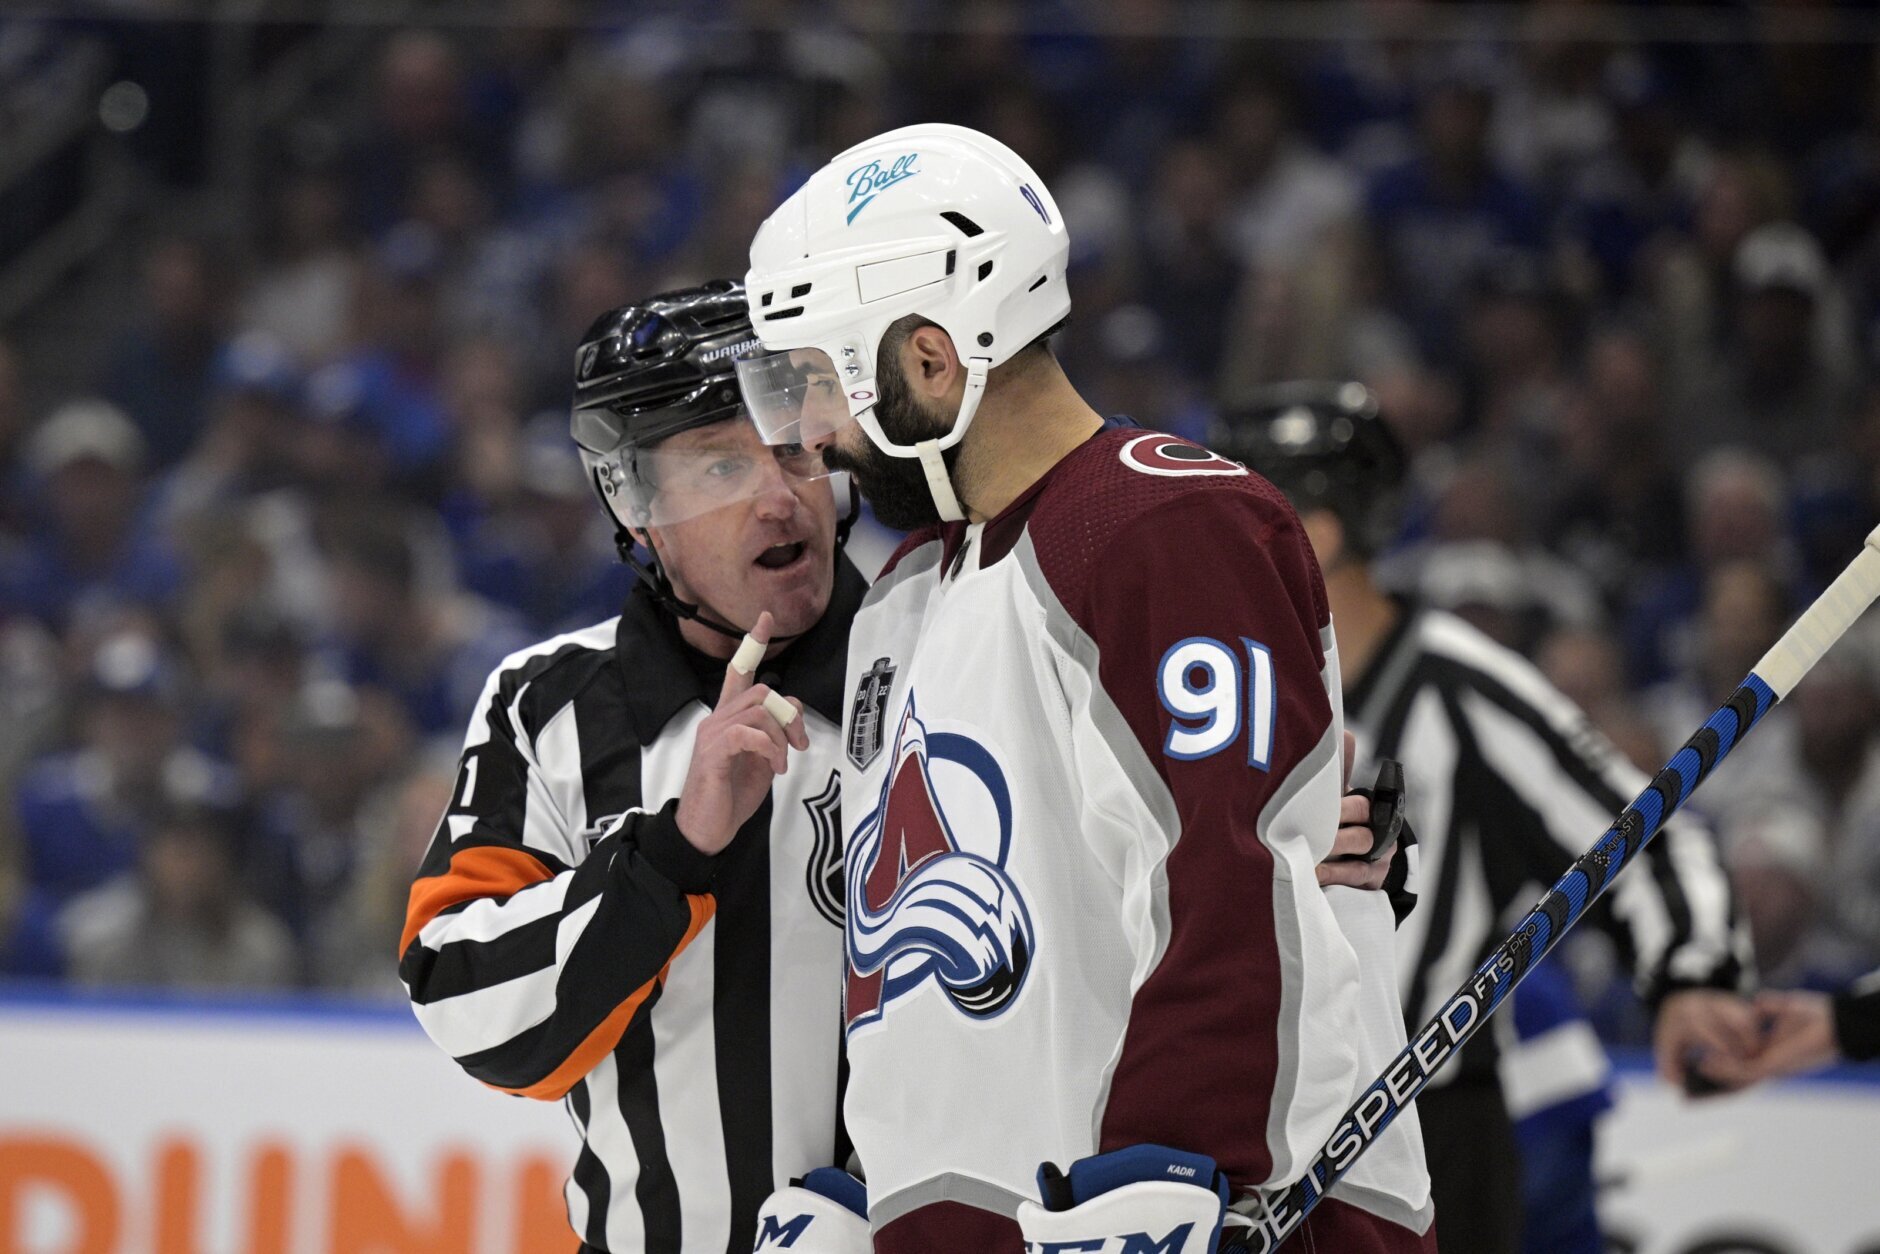 https://wtop.com/wp-content/uploads/2022/06/Stanley_Cup_Avalanche_Lightning_Hockey_85328-1880x1254.jpg